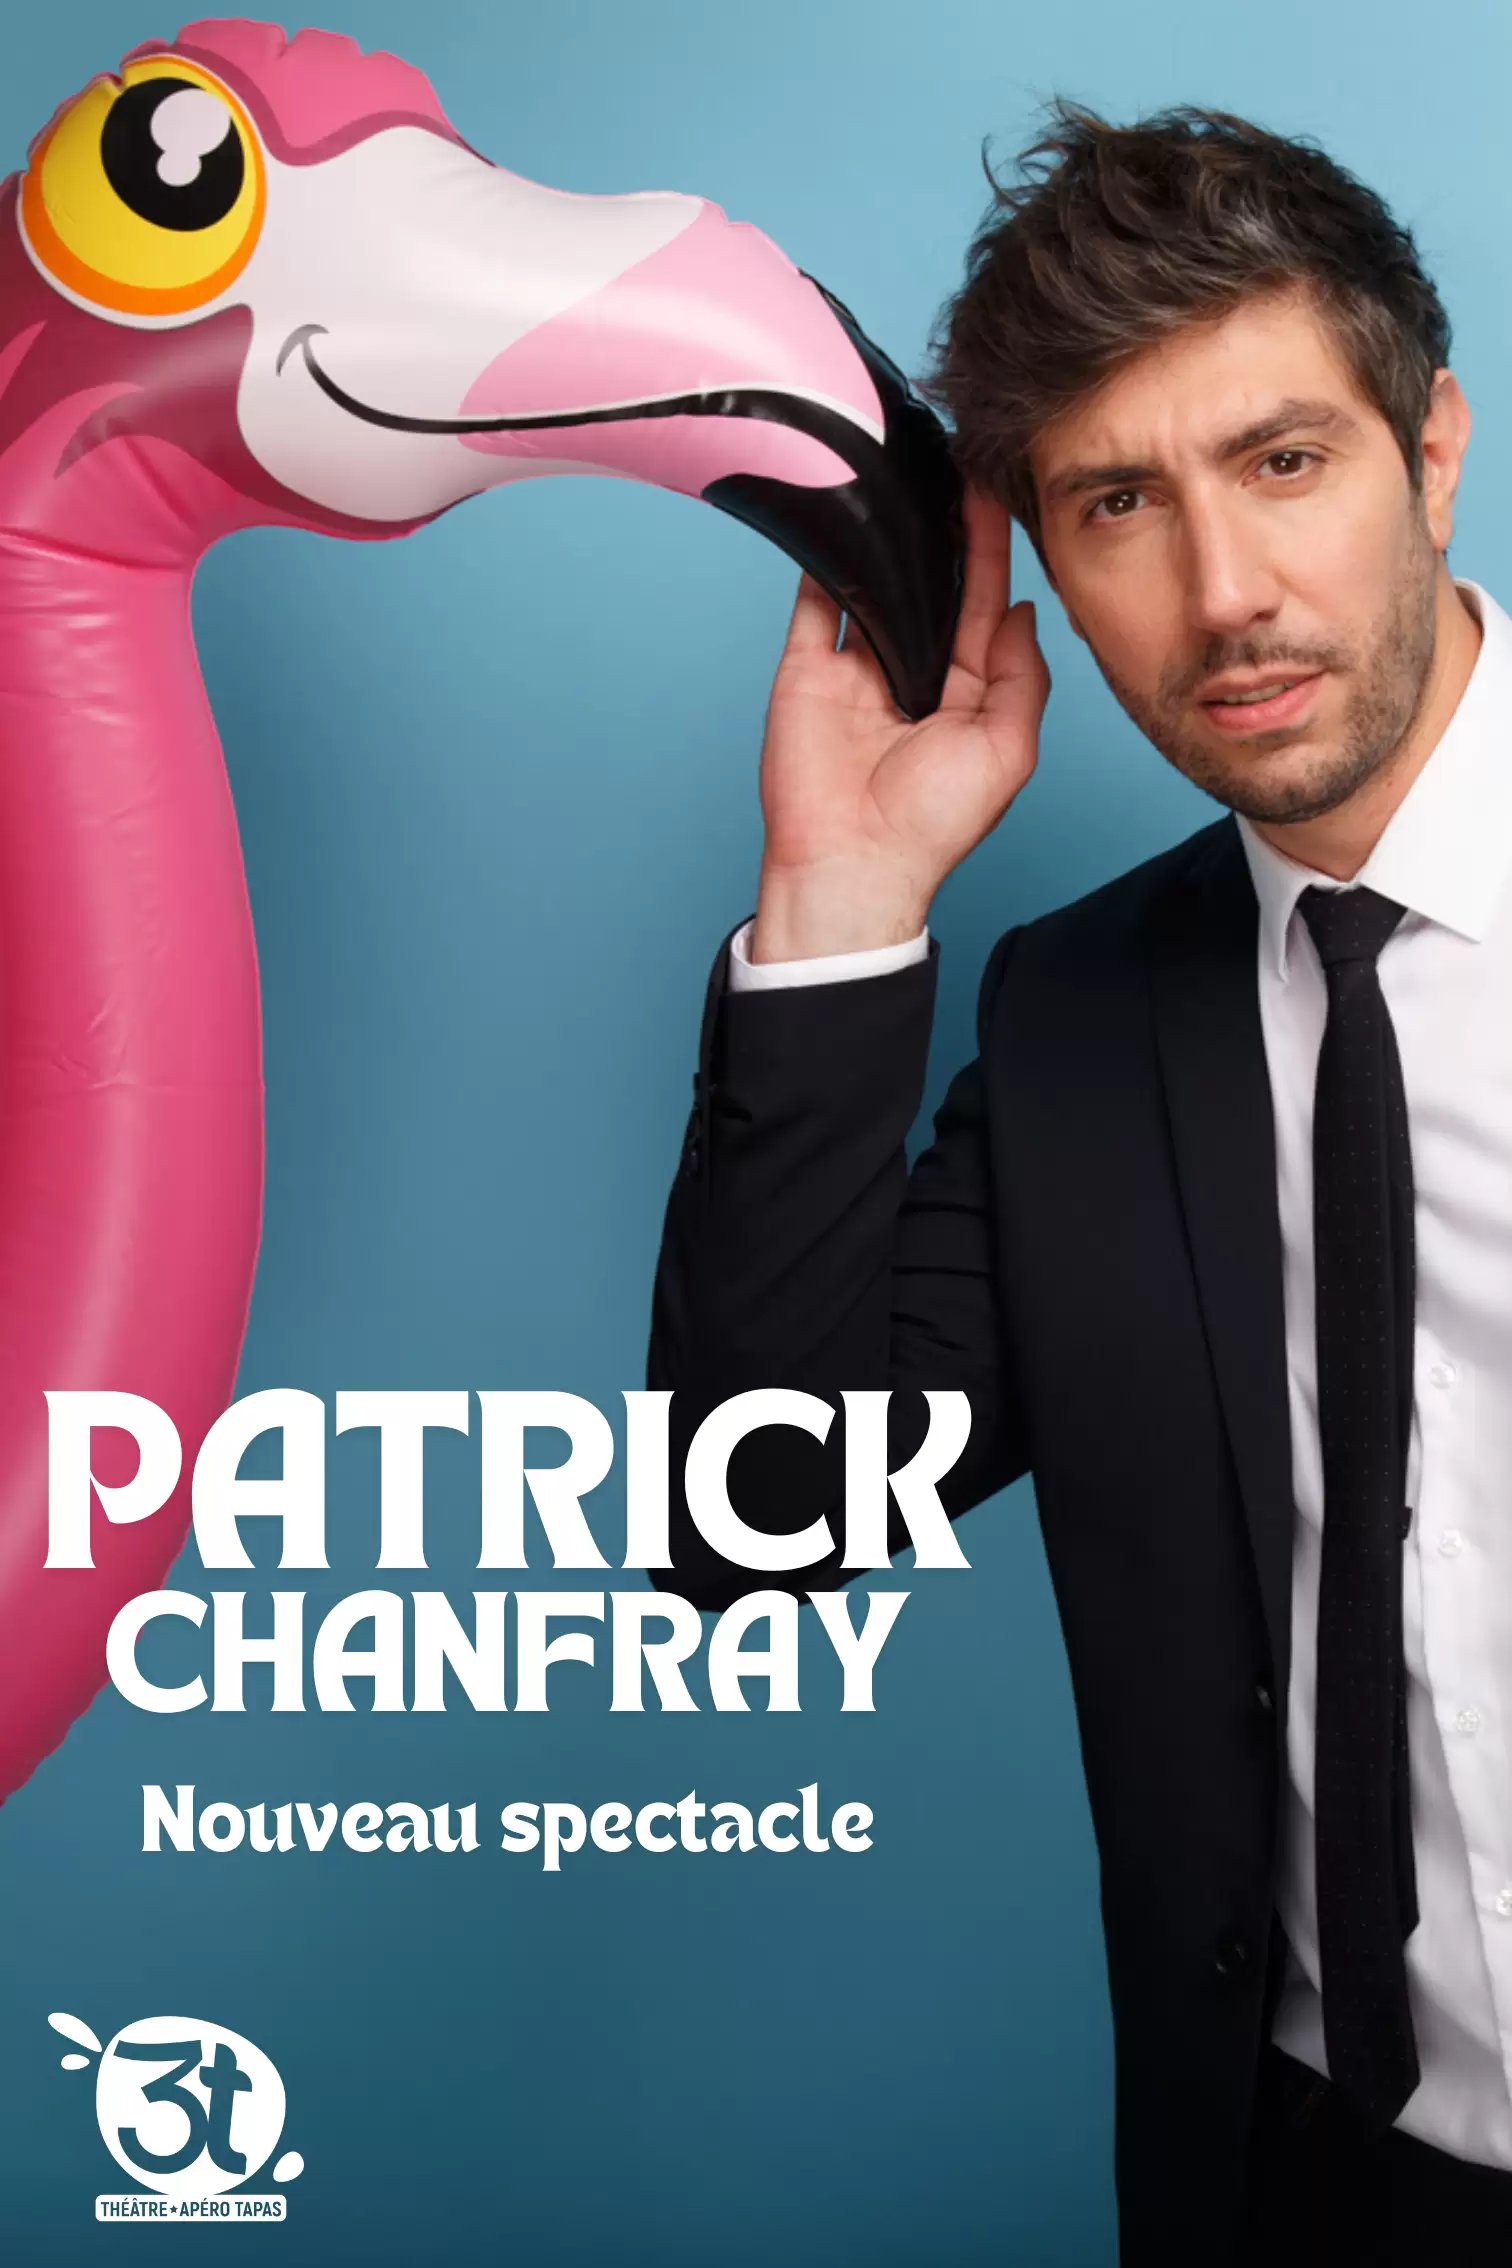 Patrick Chanfray, nouveau spectacle 